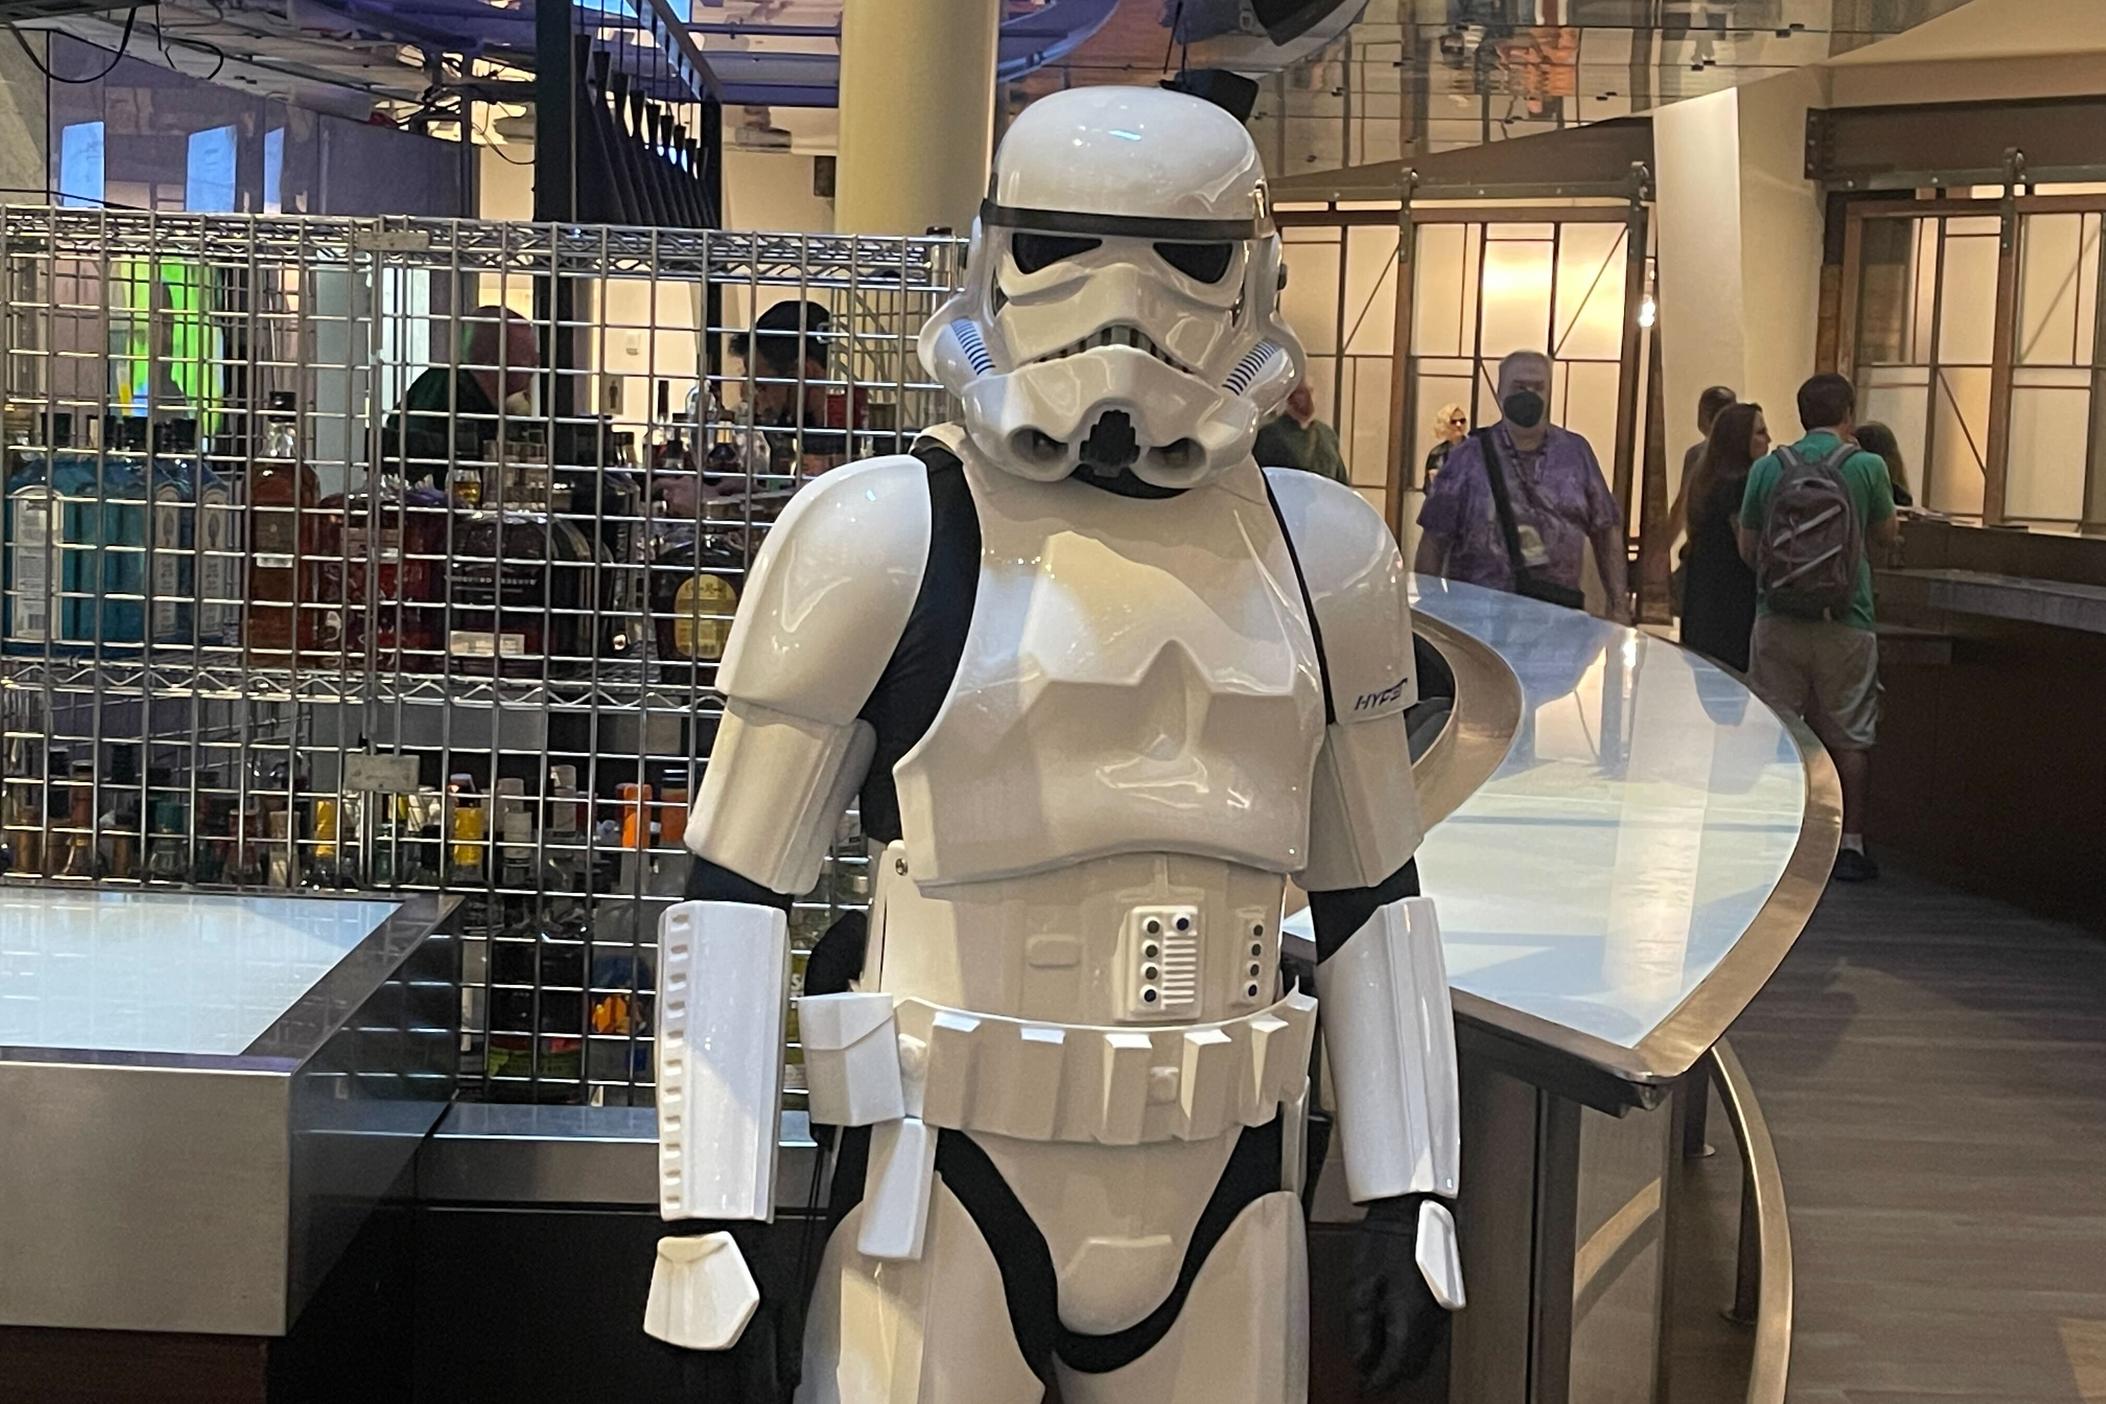 65,000 people, including this fan dressed as a Star Wars Stormtrooper, attended Dragon Con 2022 — Atlanta's largest pop culture event.